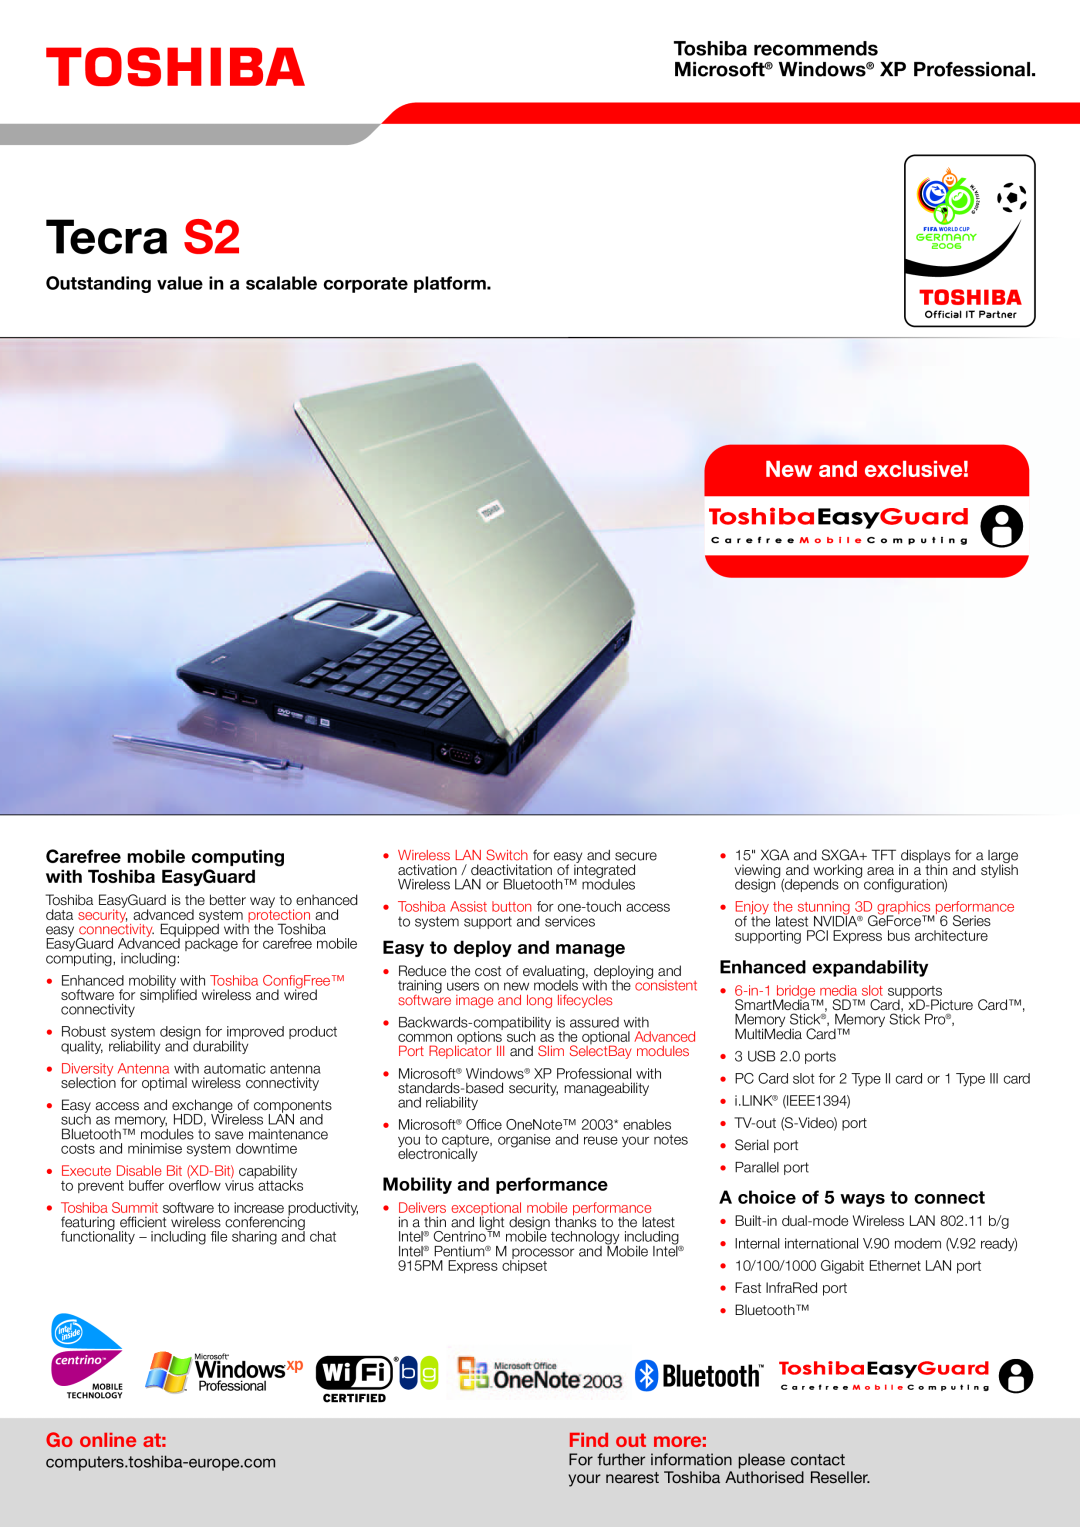 Toshiba Tecra S2 manual Go online at, Find out more, computers.toshiba-europe.com, For further information please contact 